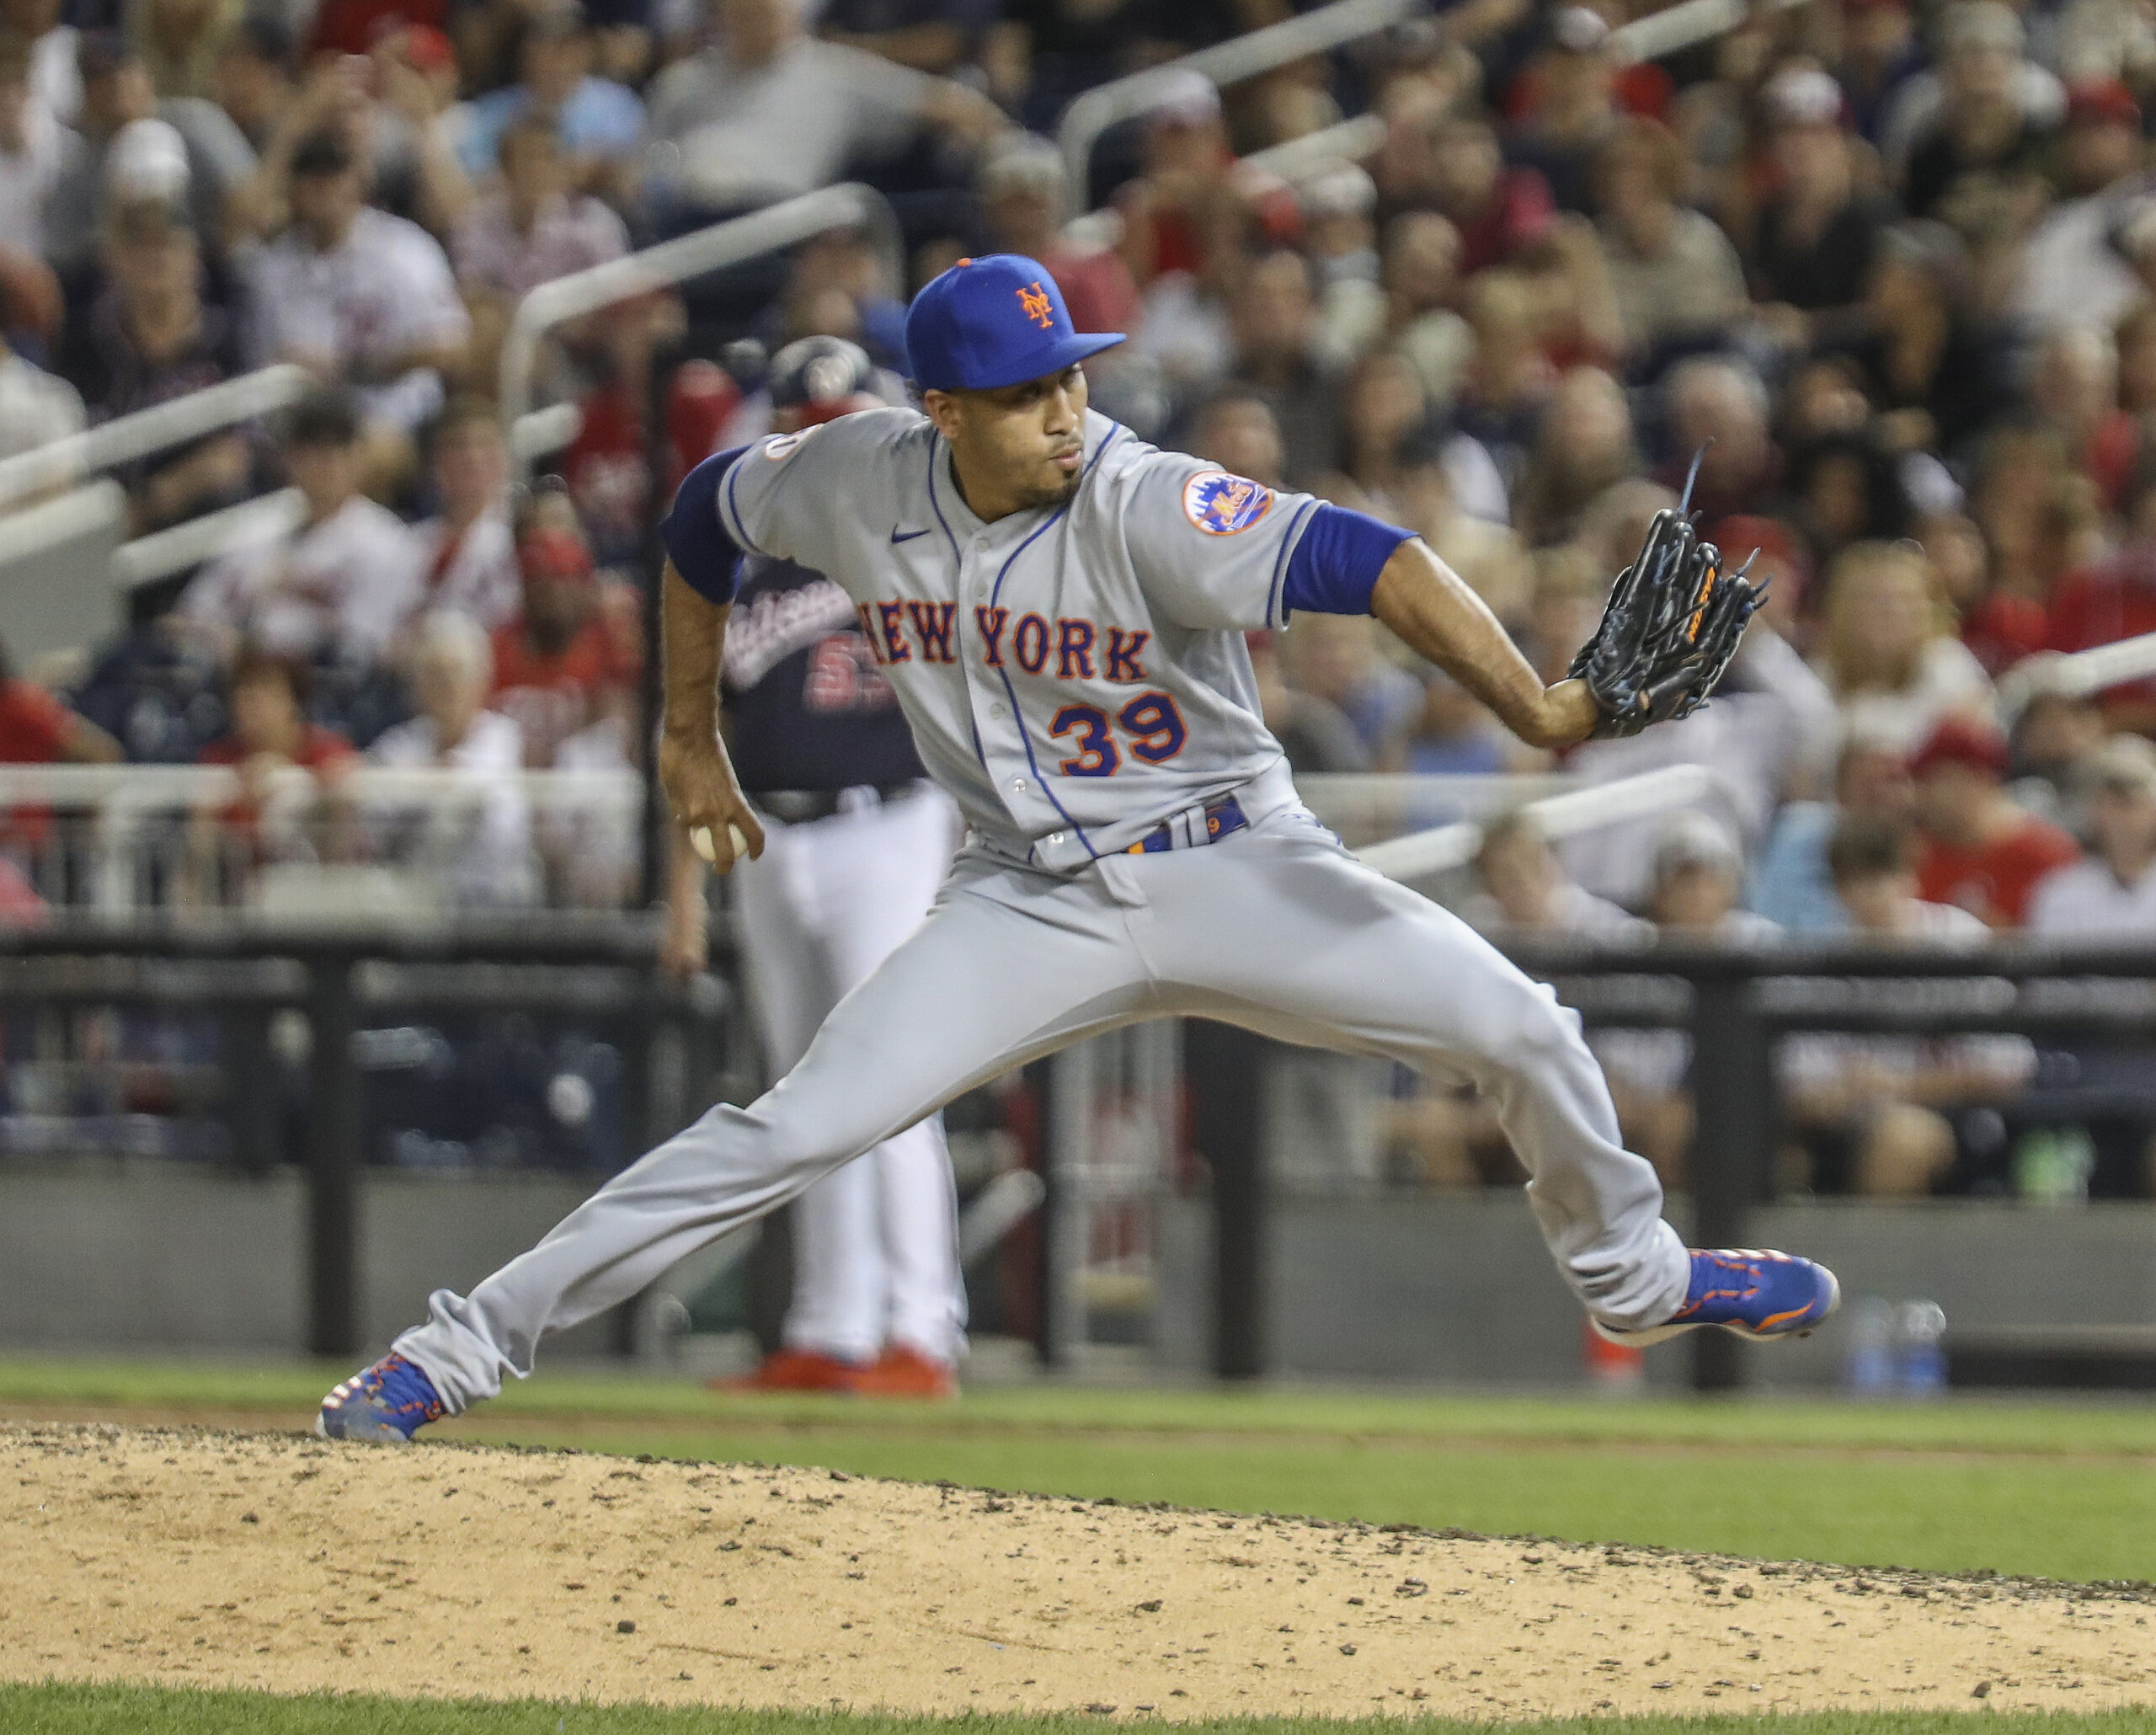 Mets closer Edwin Díaz injures knee at WBC; USA advances to quarterfinals   Phillies Nation - Your source for Philadelphia Phillies news, opinion,  history, rumors, events, and other fun stuff.